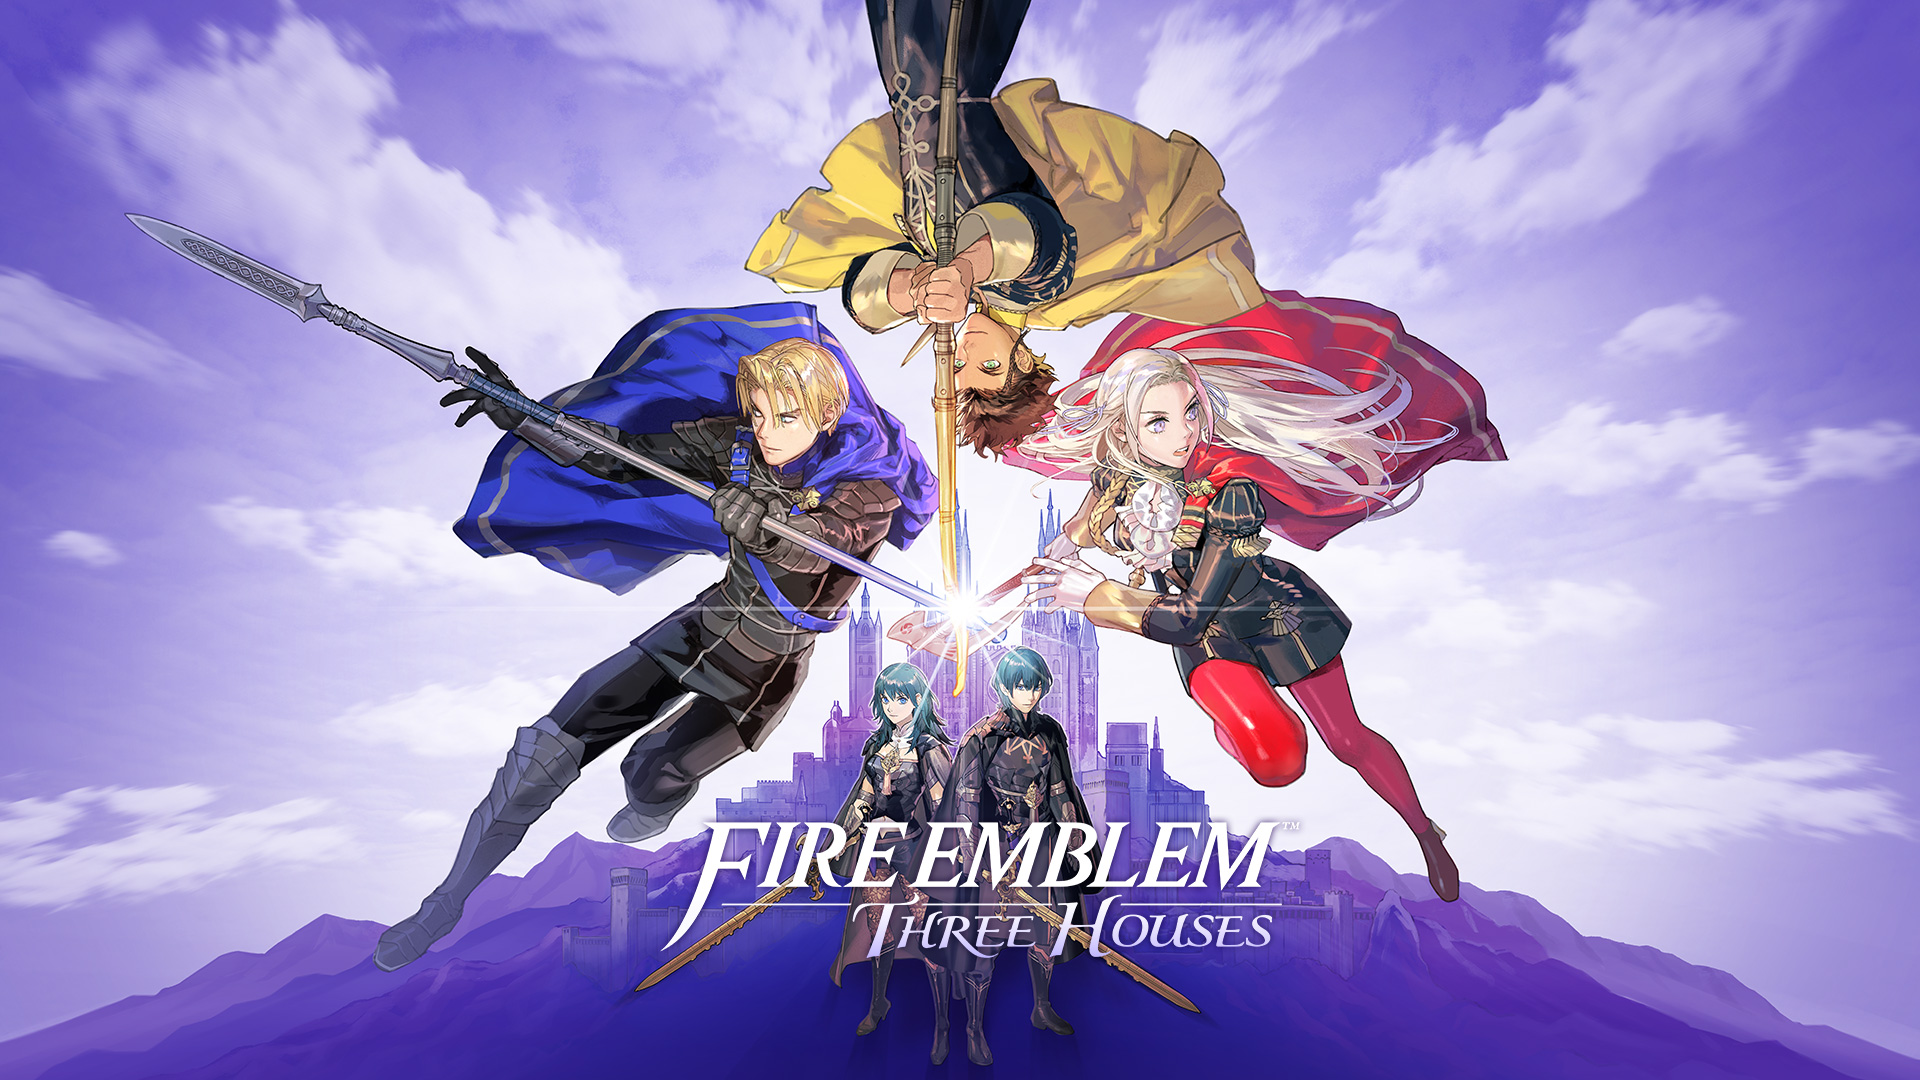 Walmart.com has Fire Emblem: Three Houses (Digital Download only) on sale for $39.99